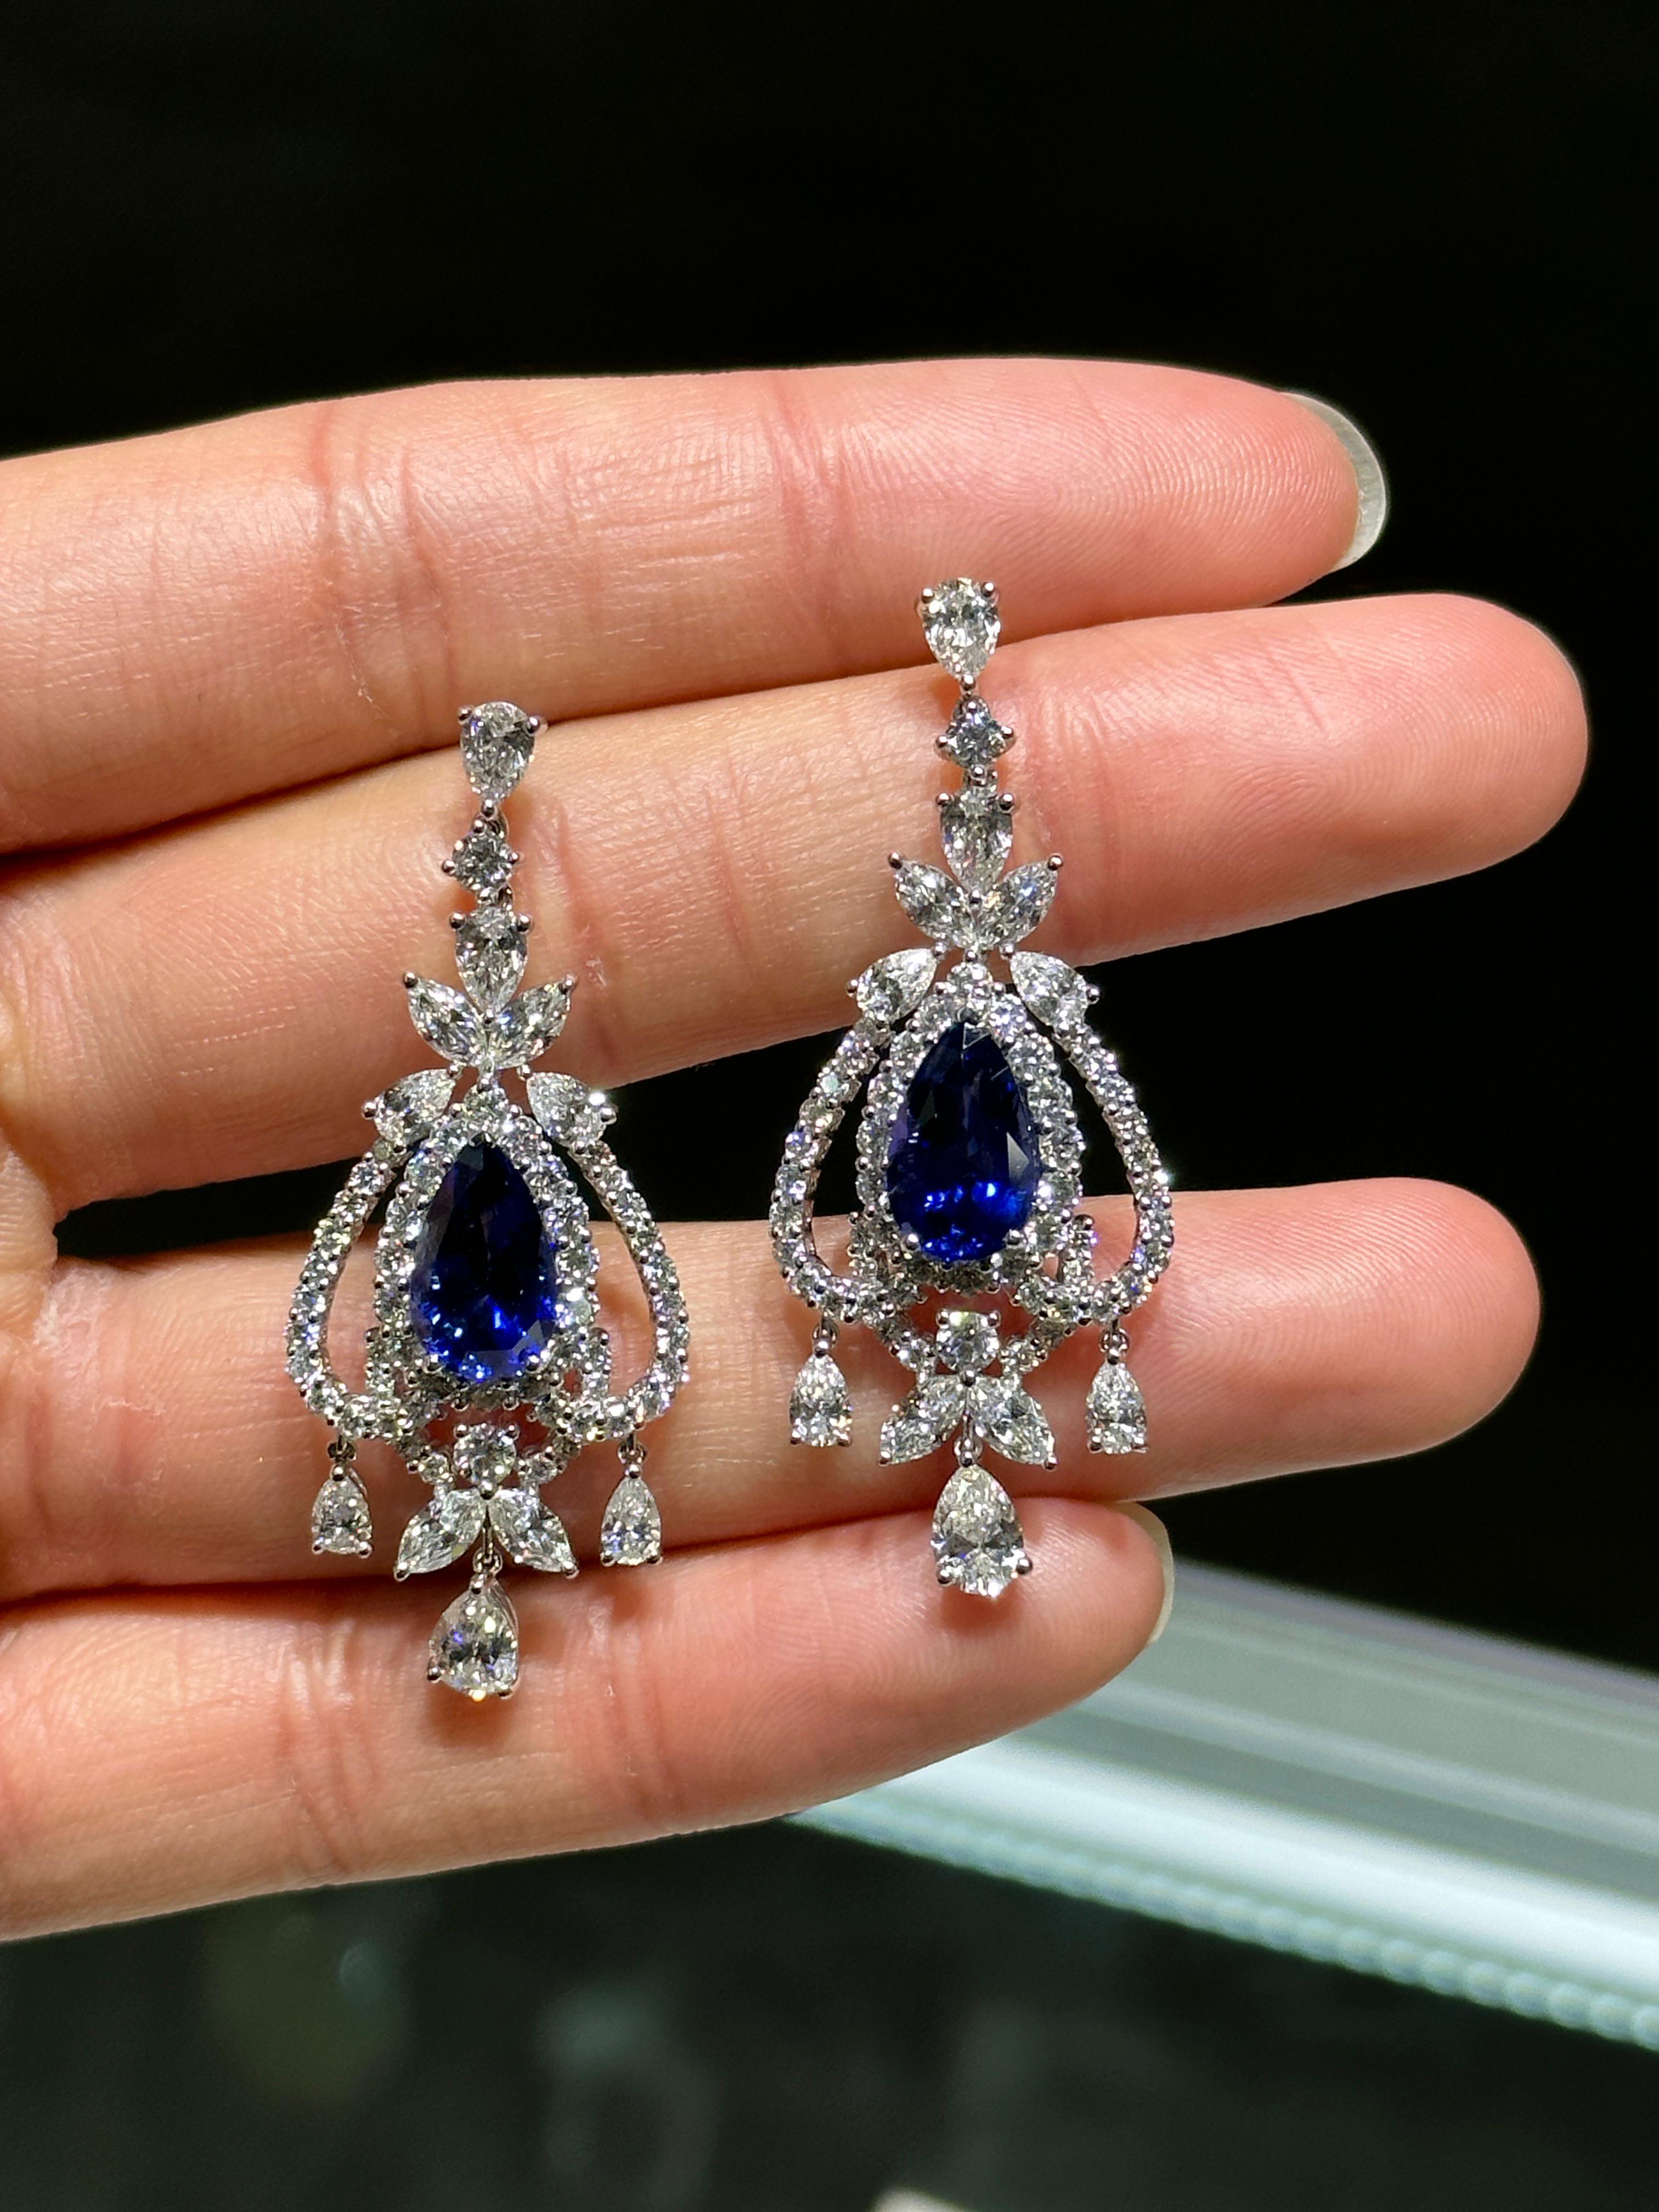 The Following Item we are offering is a Rare Important Radiant 18KT Gold Large Rare Fancy Blue Ceylon Sapphire and Diamond Earrings. Earrings are comprised of Gorgeous Ceylon Blue Sapphires Spectacularly Set in and surrounded by Magnificent